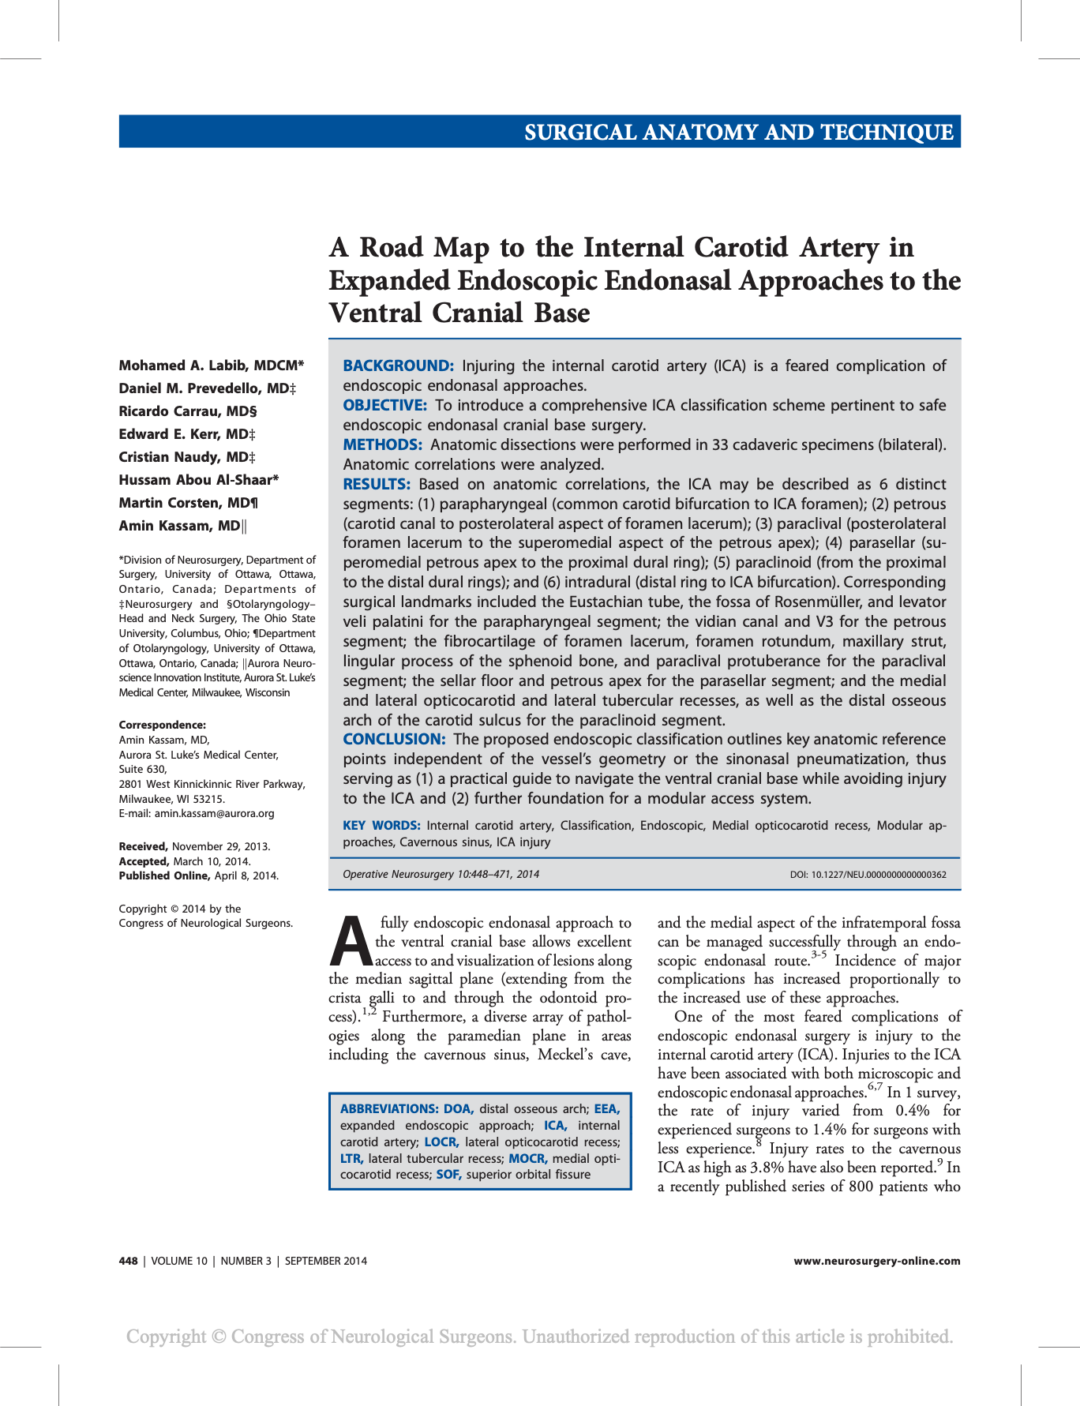 A Road Map to the Internal Carotid Artery in Expanded Endoscopic Endonasal Approaches to the Ventral Cranial Base